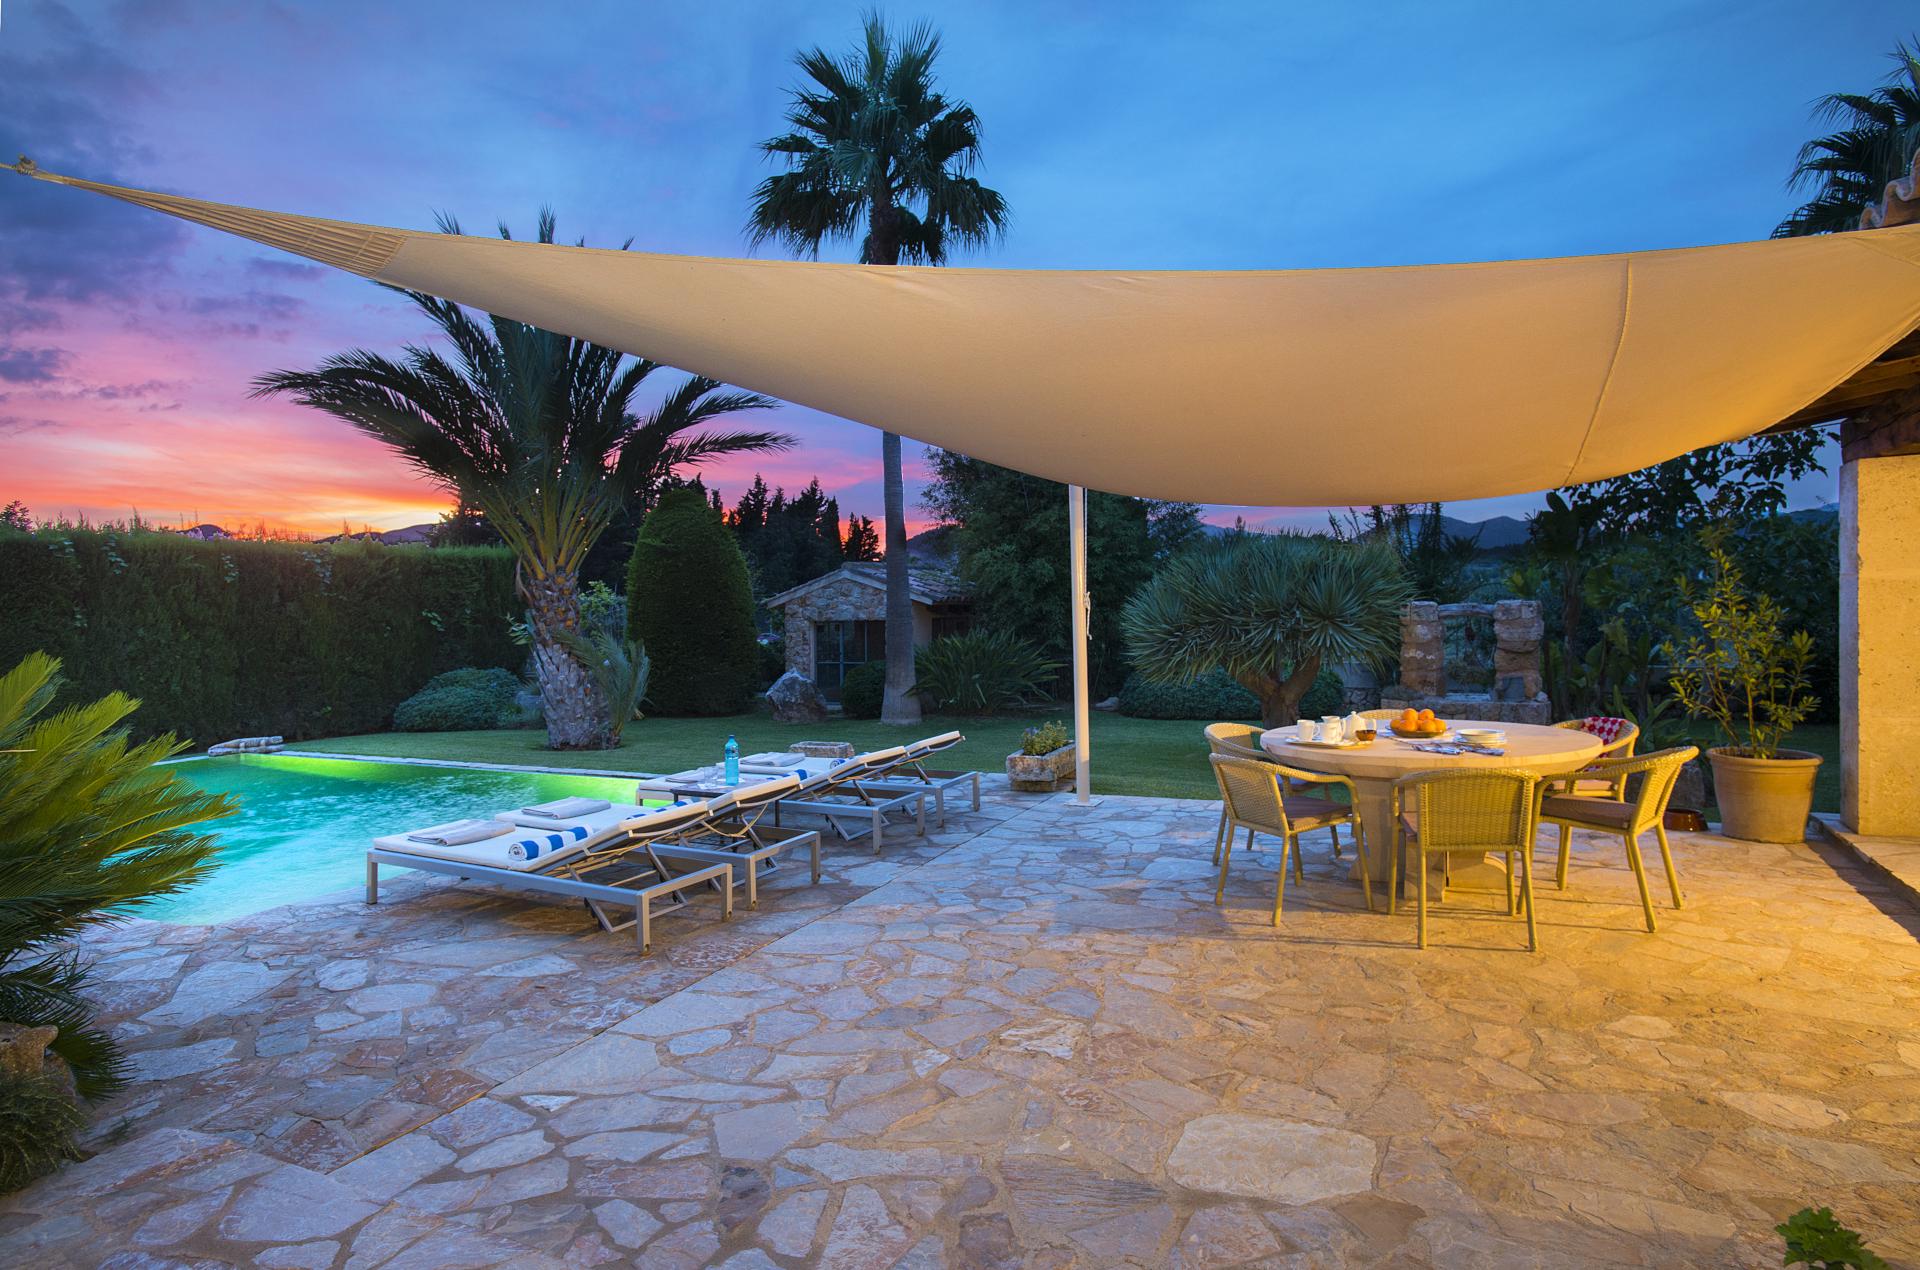 Villa Pepi: Perfectly positioned to explore the character towns of Pollenca and Alcudia 